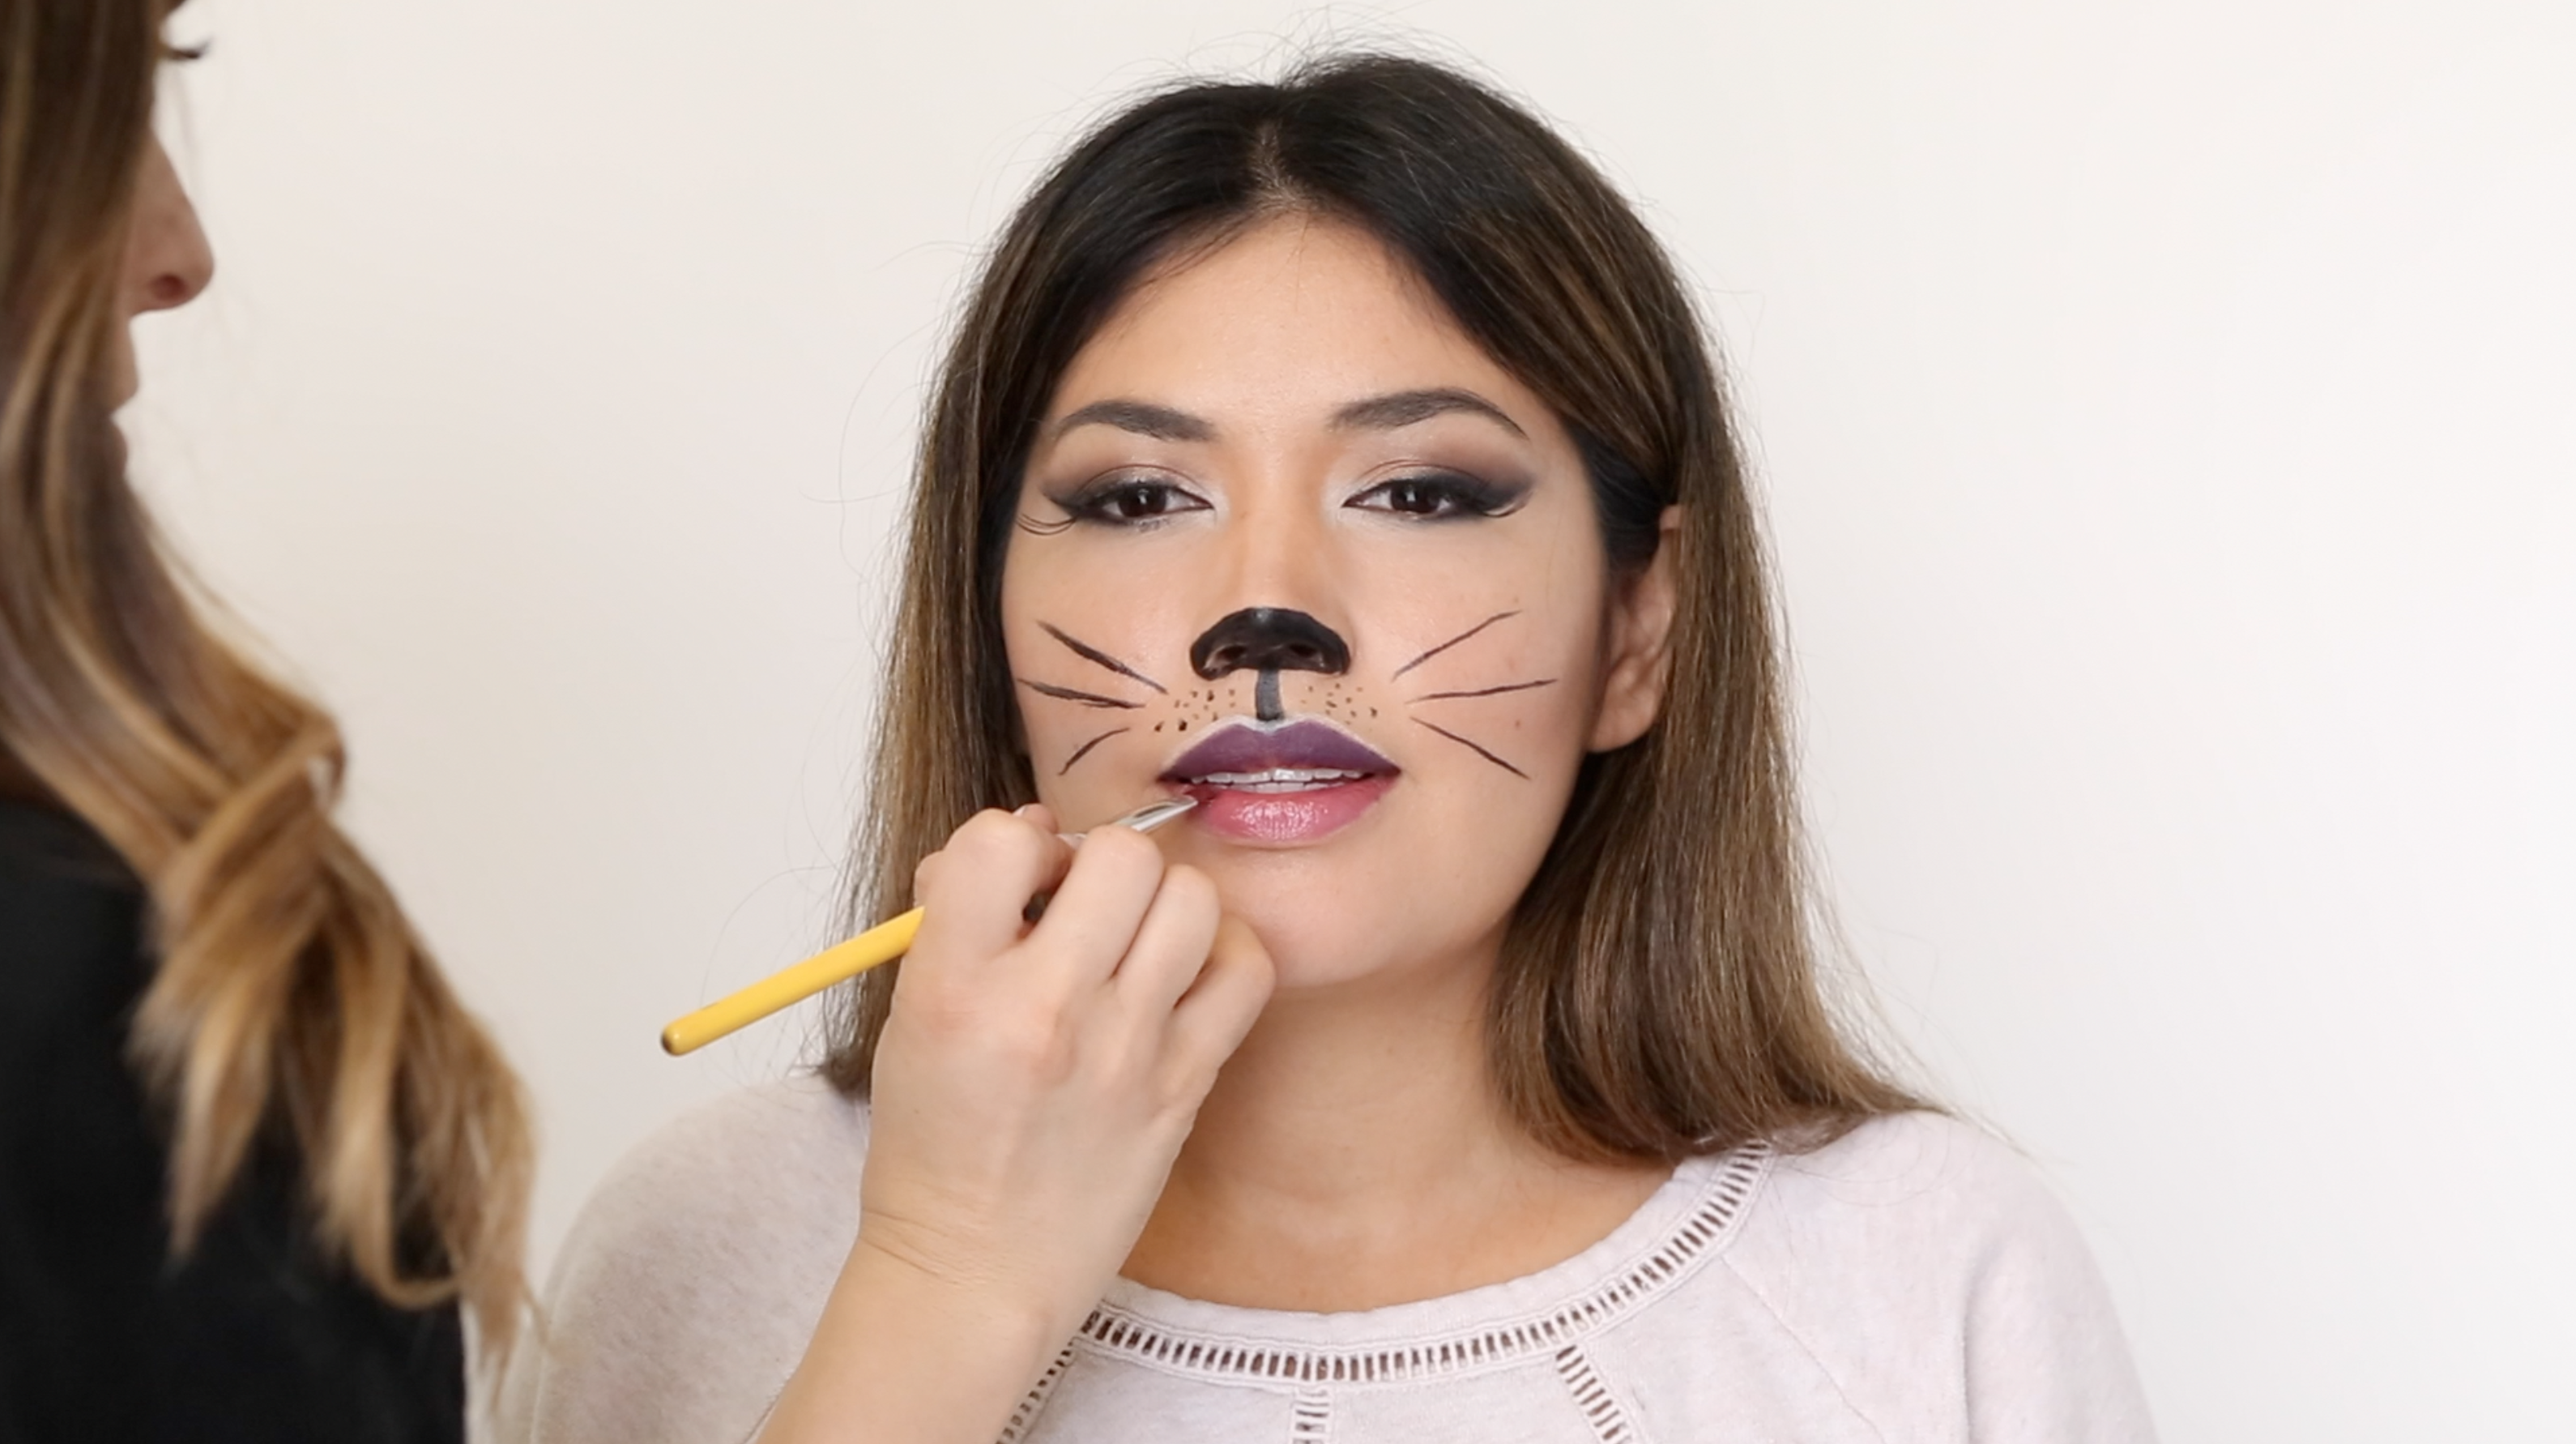 Easy Halloween Makeup Tutorials That Your Inner Lazy Girl Will Love